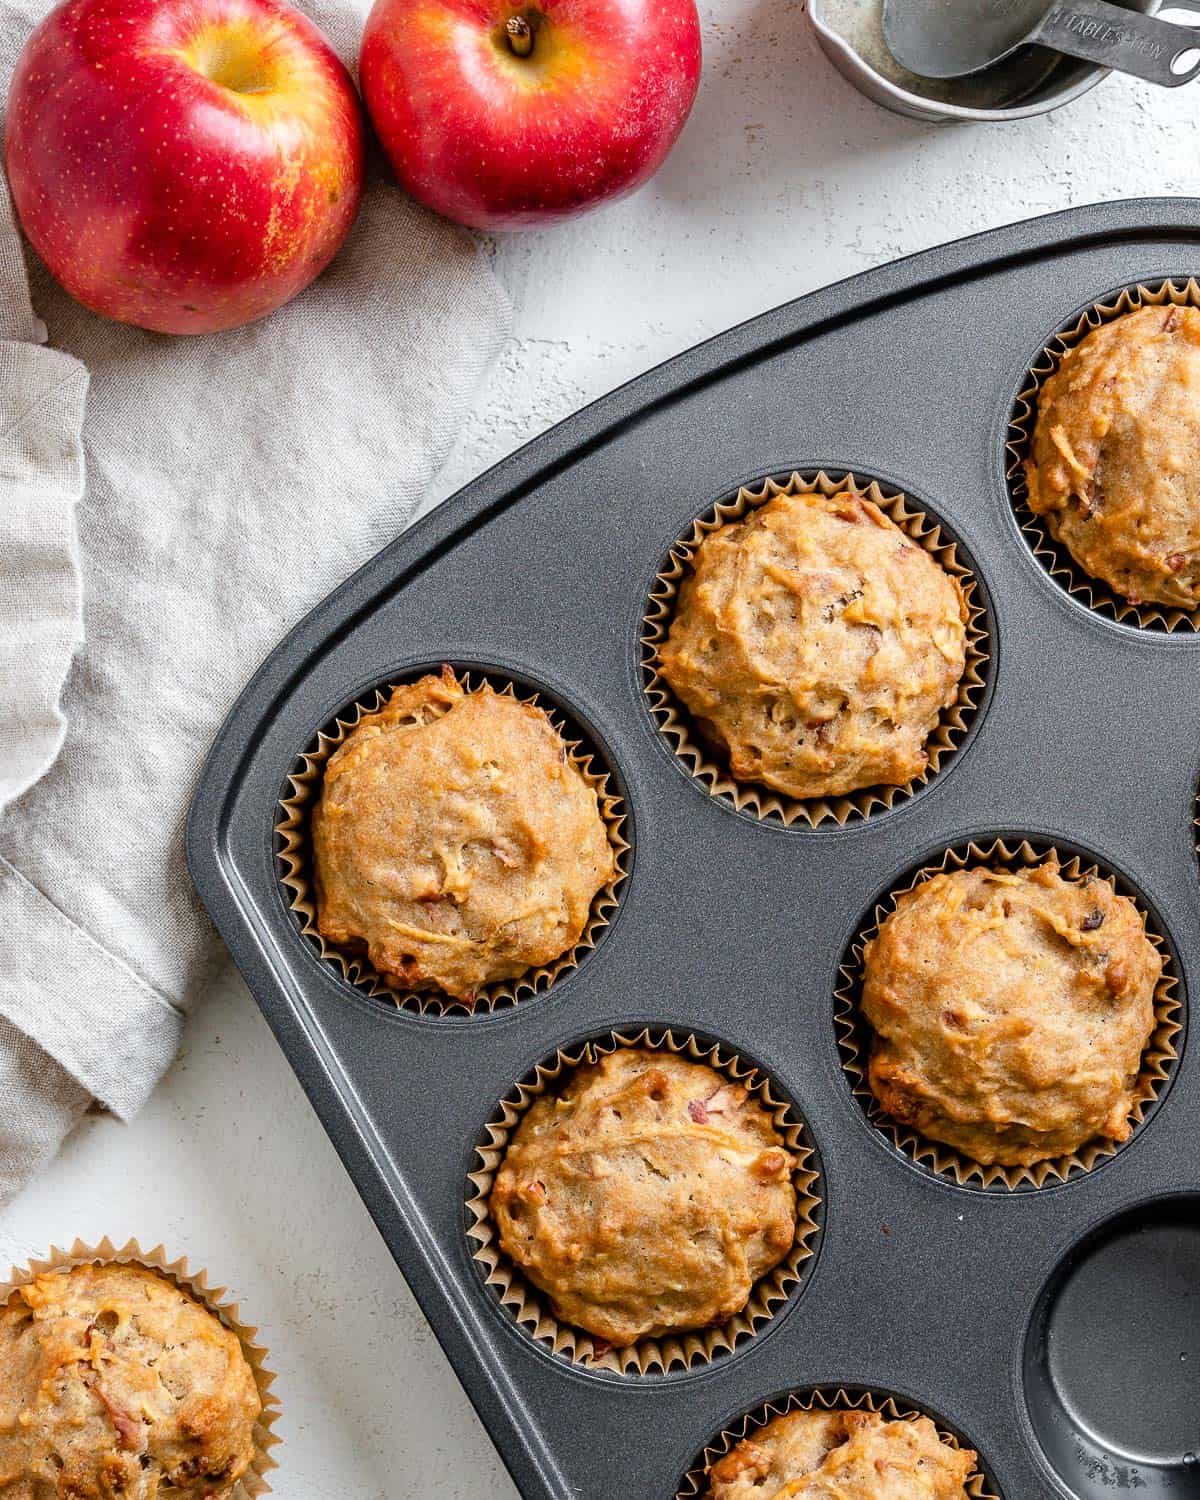 several completed Vegan Apple Muffins spread out on a white surface